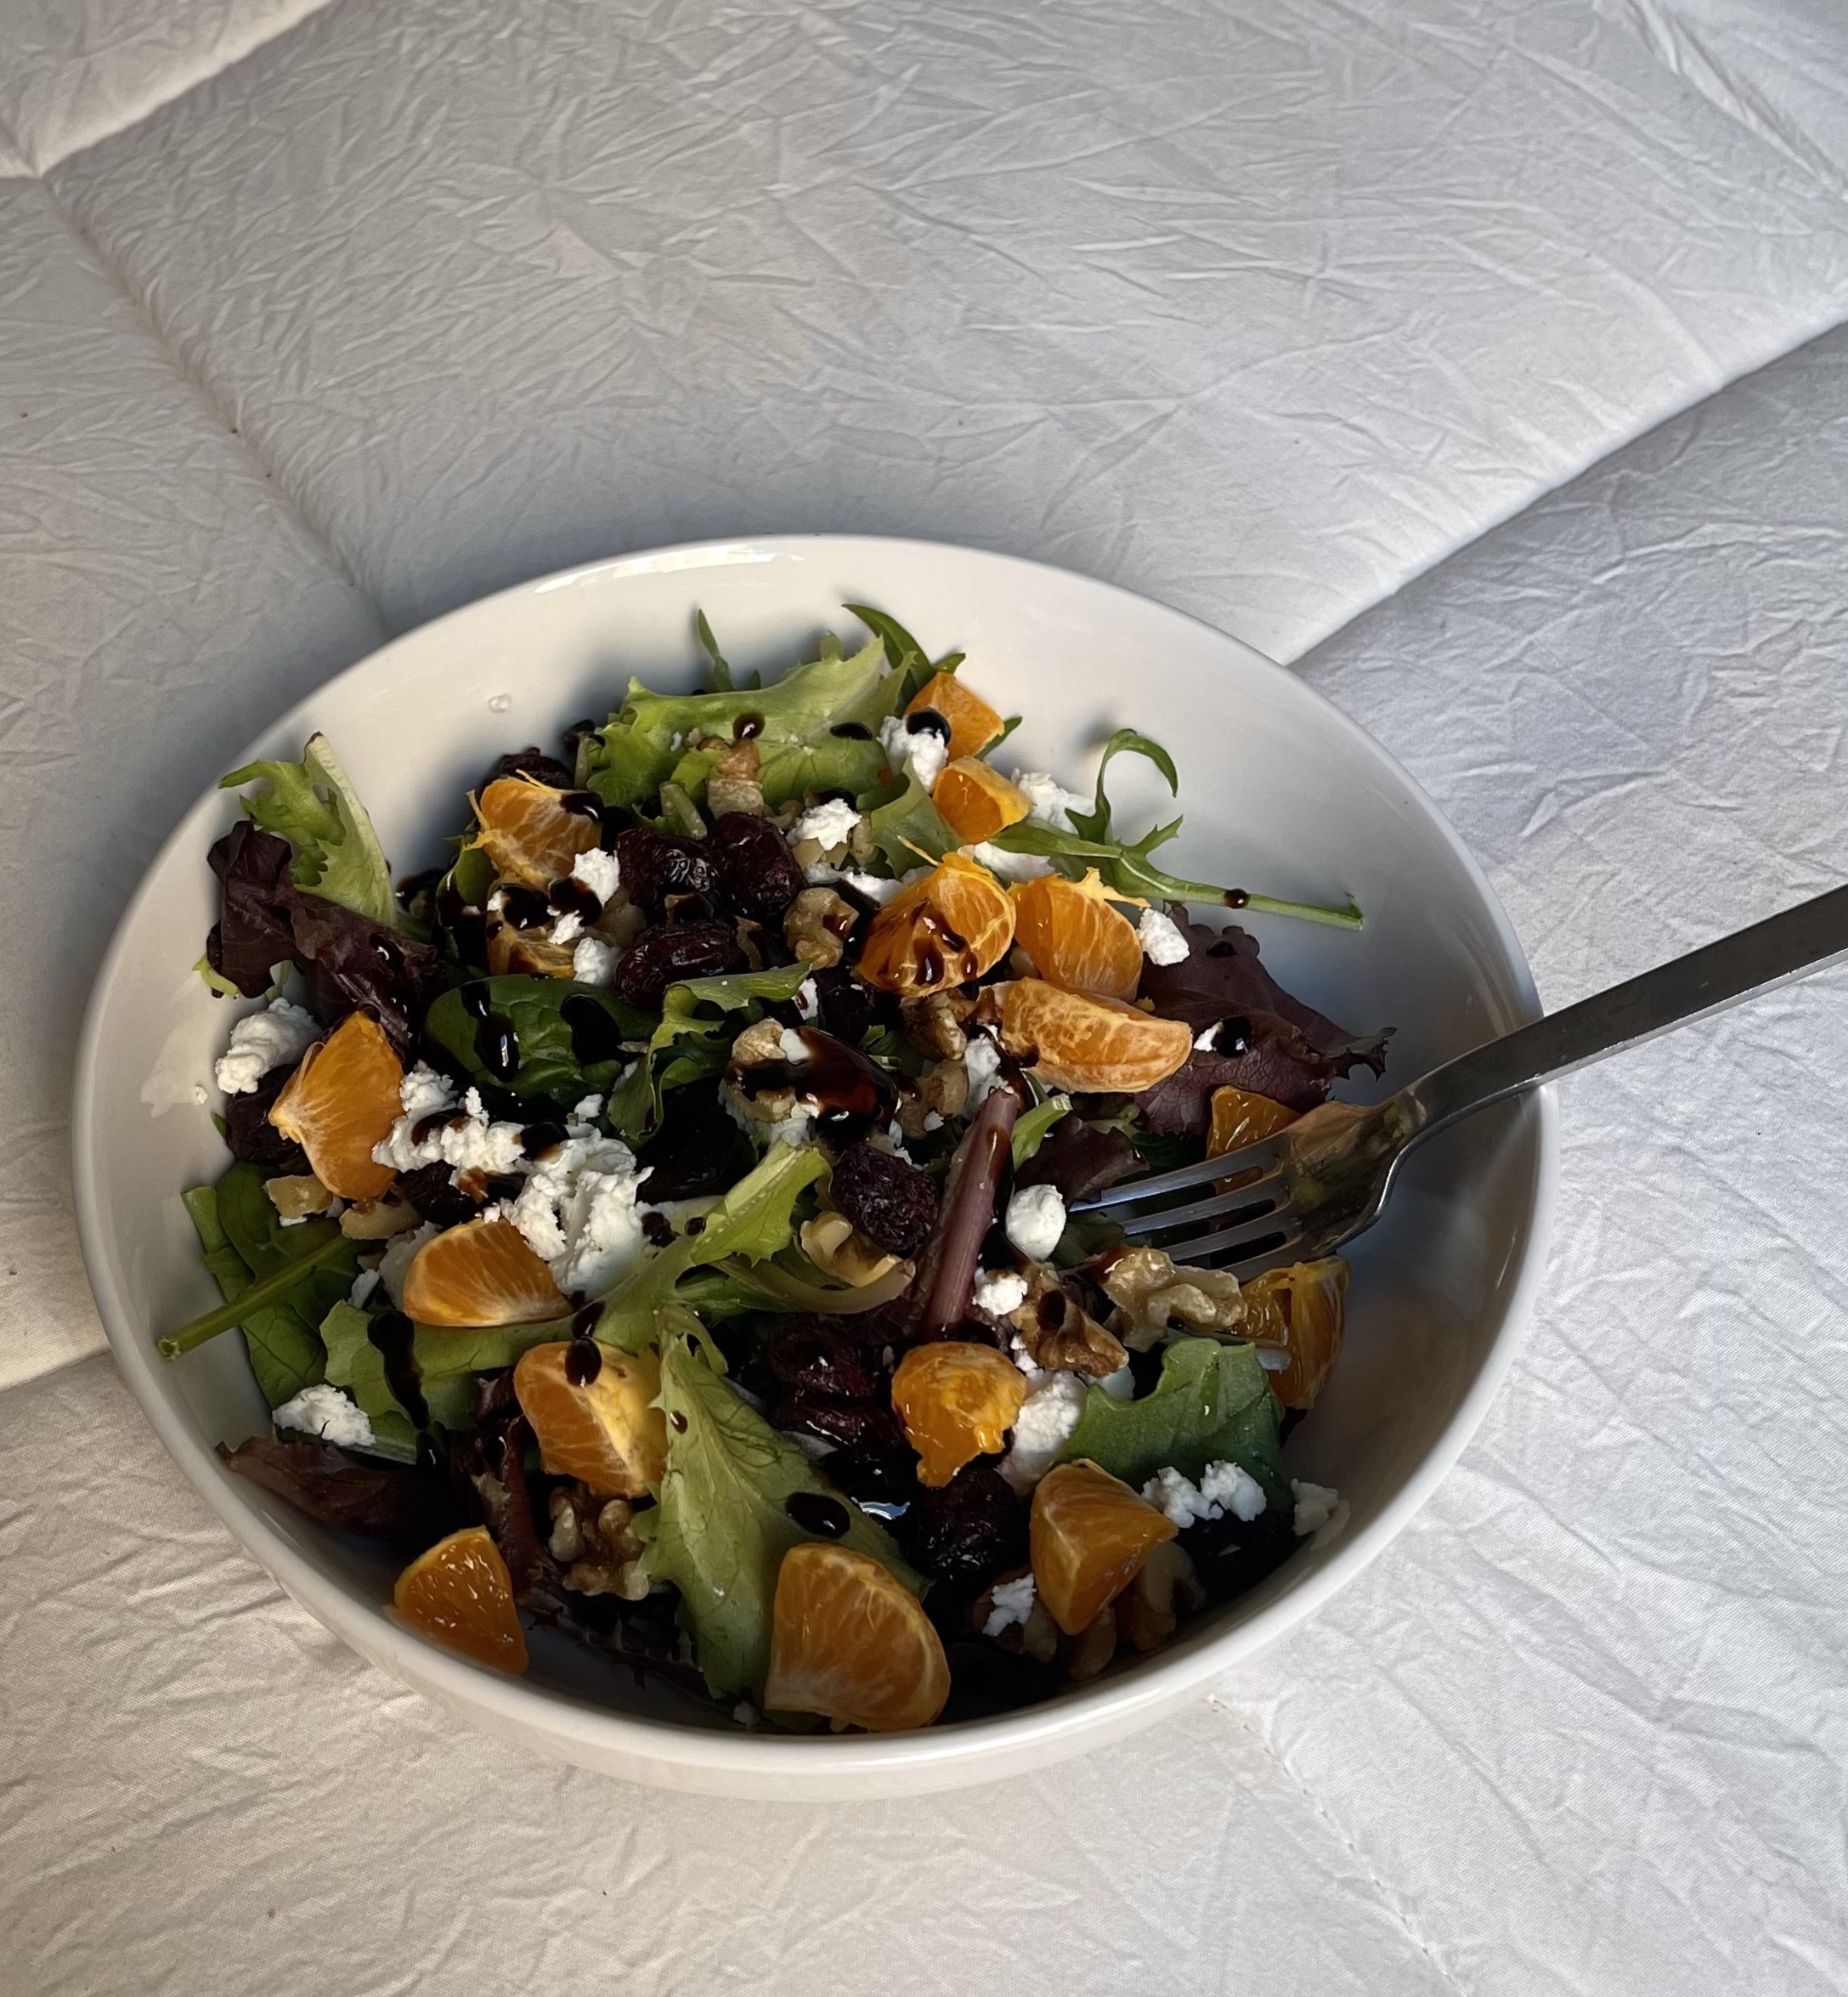 looking for a simple, healthy lunch idea? try out this perfect winter salad!